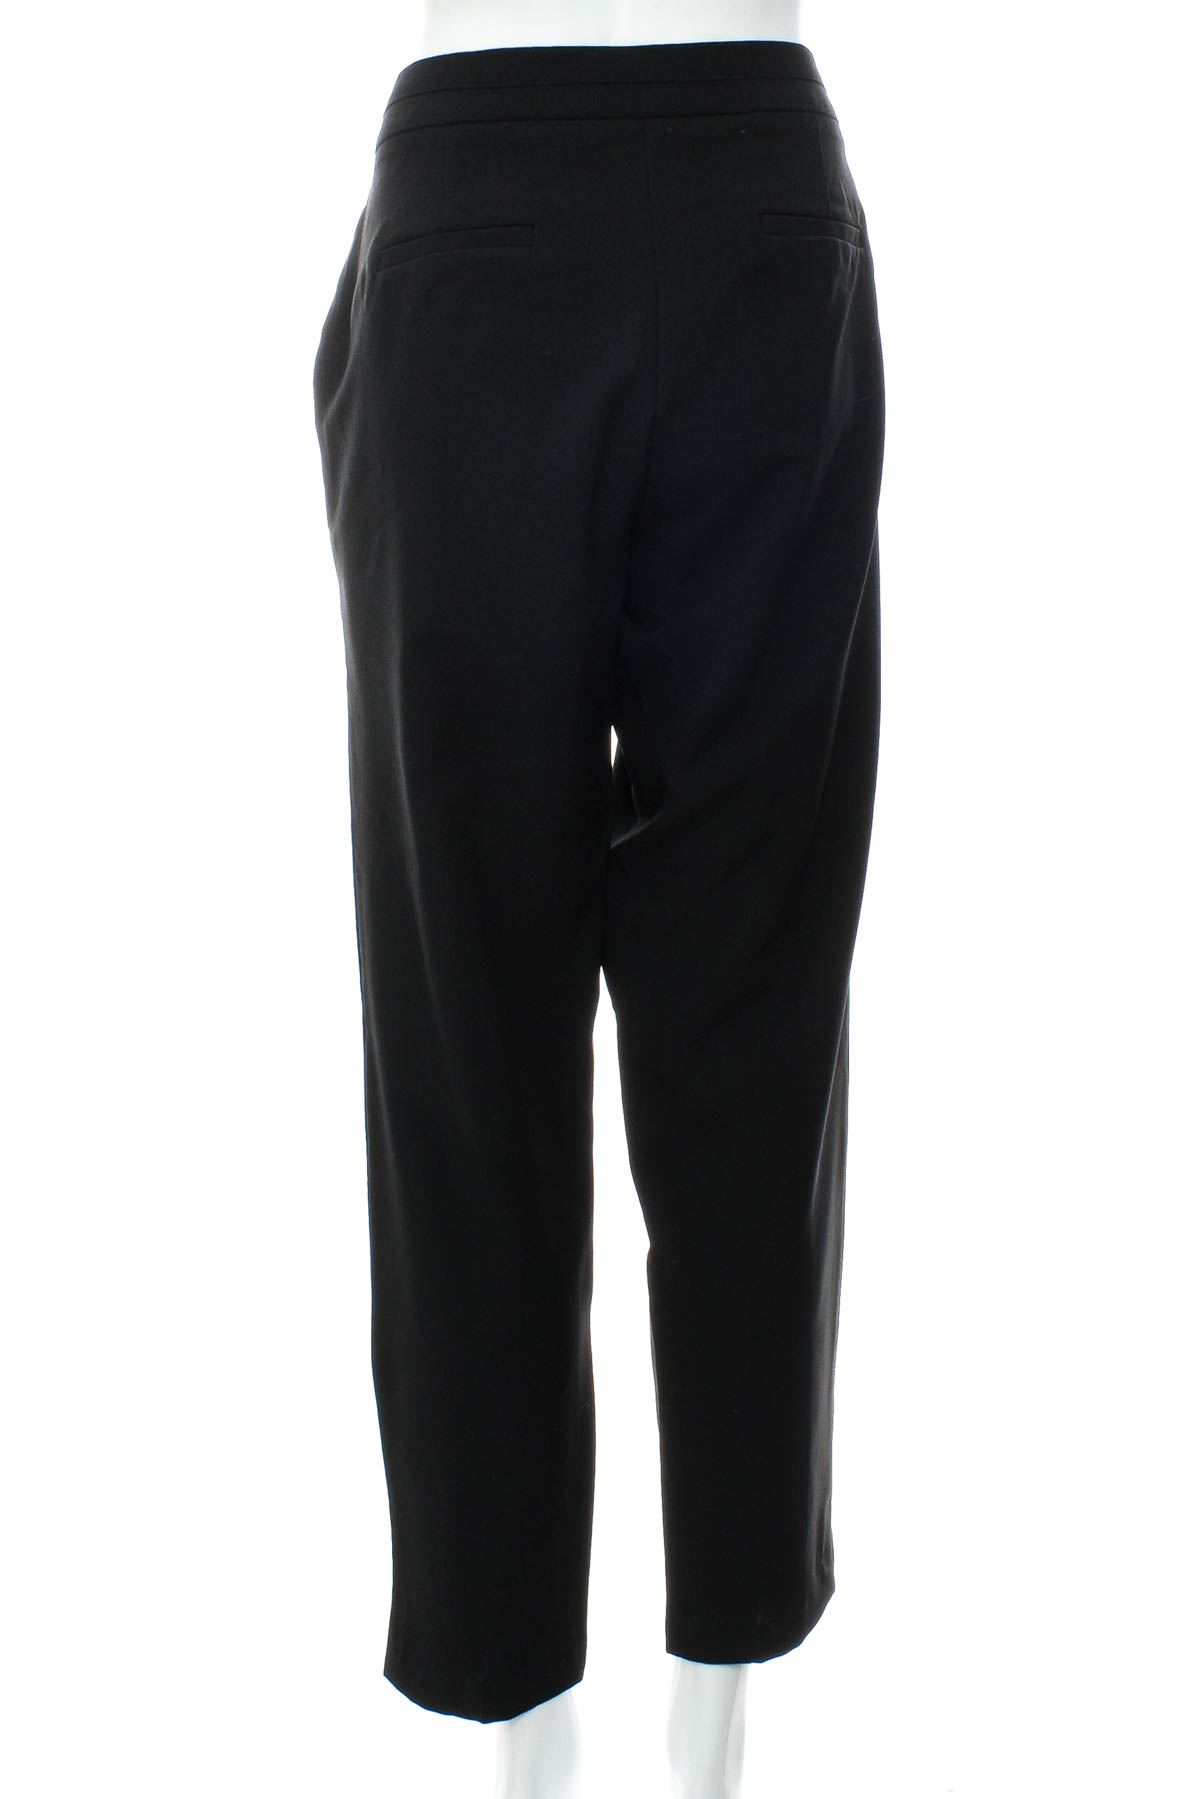 Women's trousers - Target Collection - 1